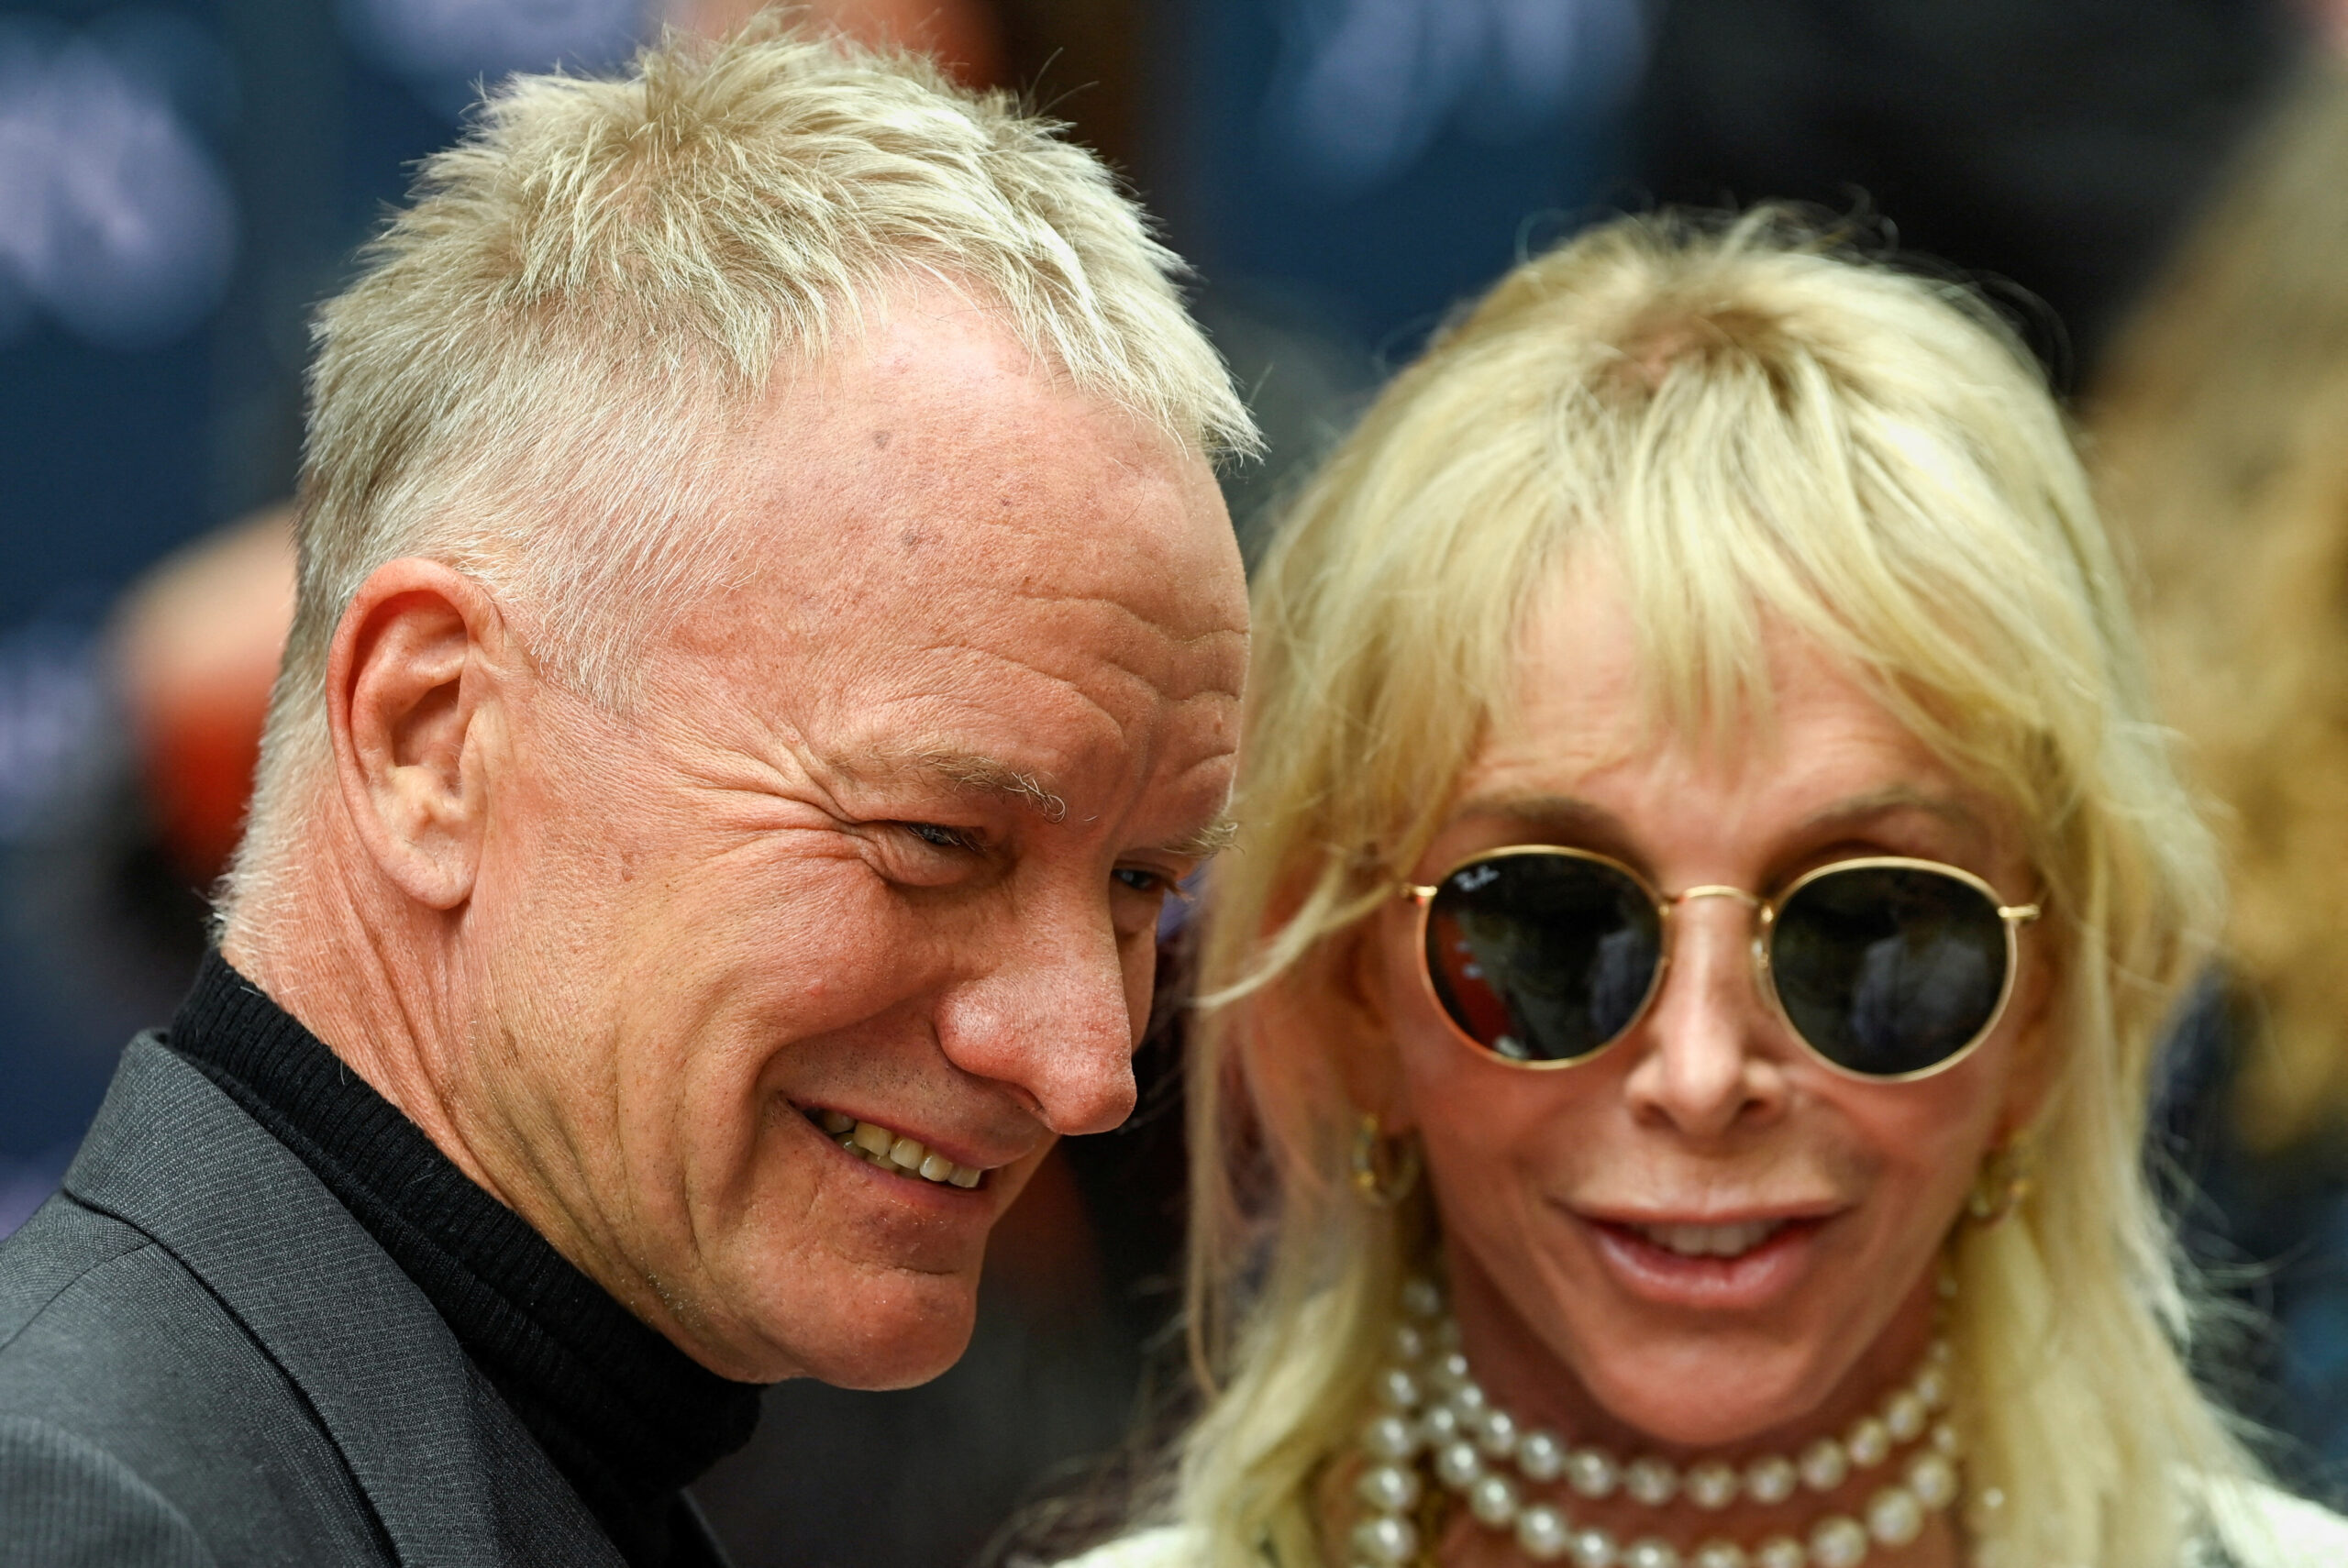 Sting and his wife Trudie Styler arrive for The Ivors music and songwriting awards ceremony in London, Britain, May 18, 2023. REUTERS/Toby Melville